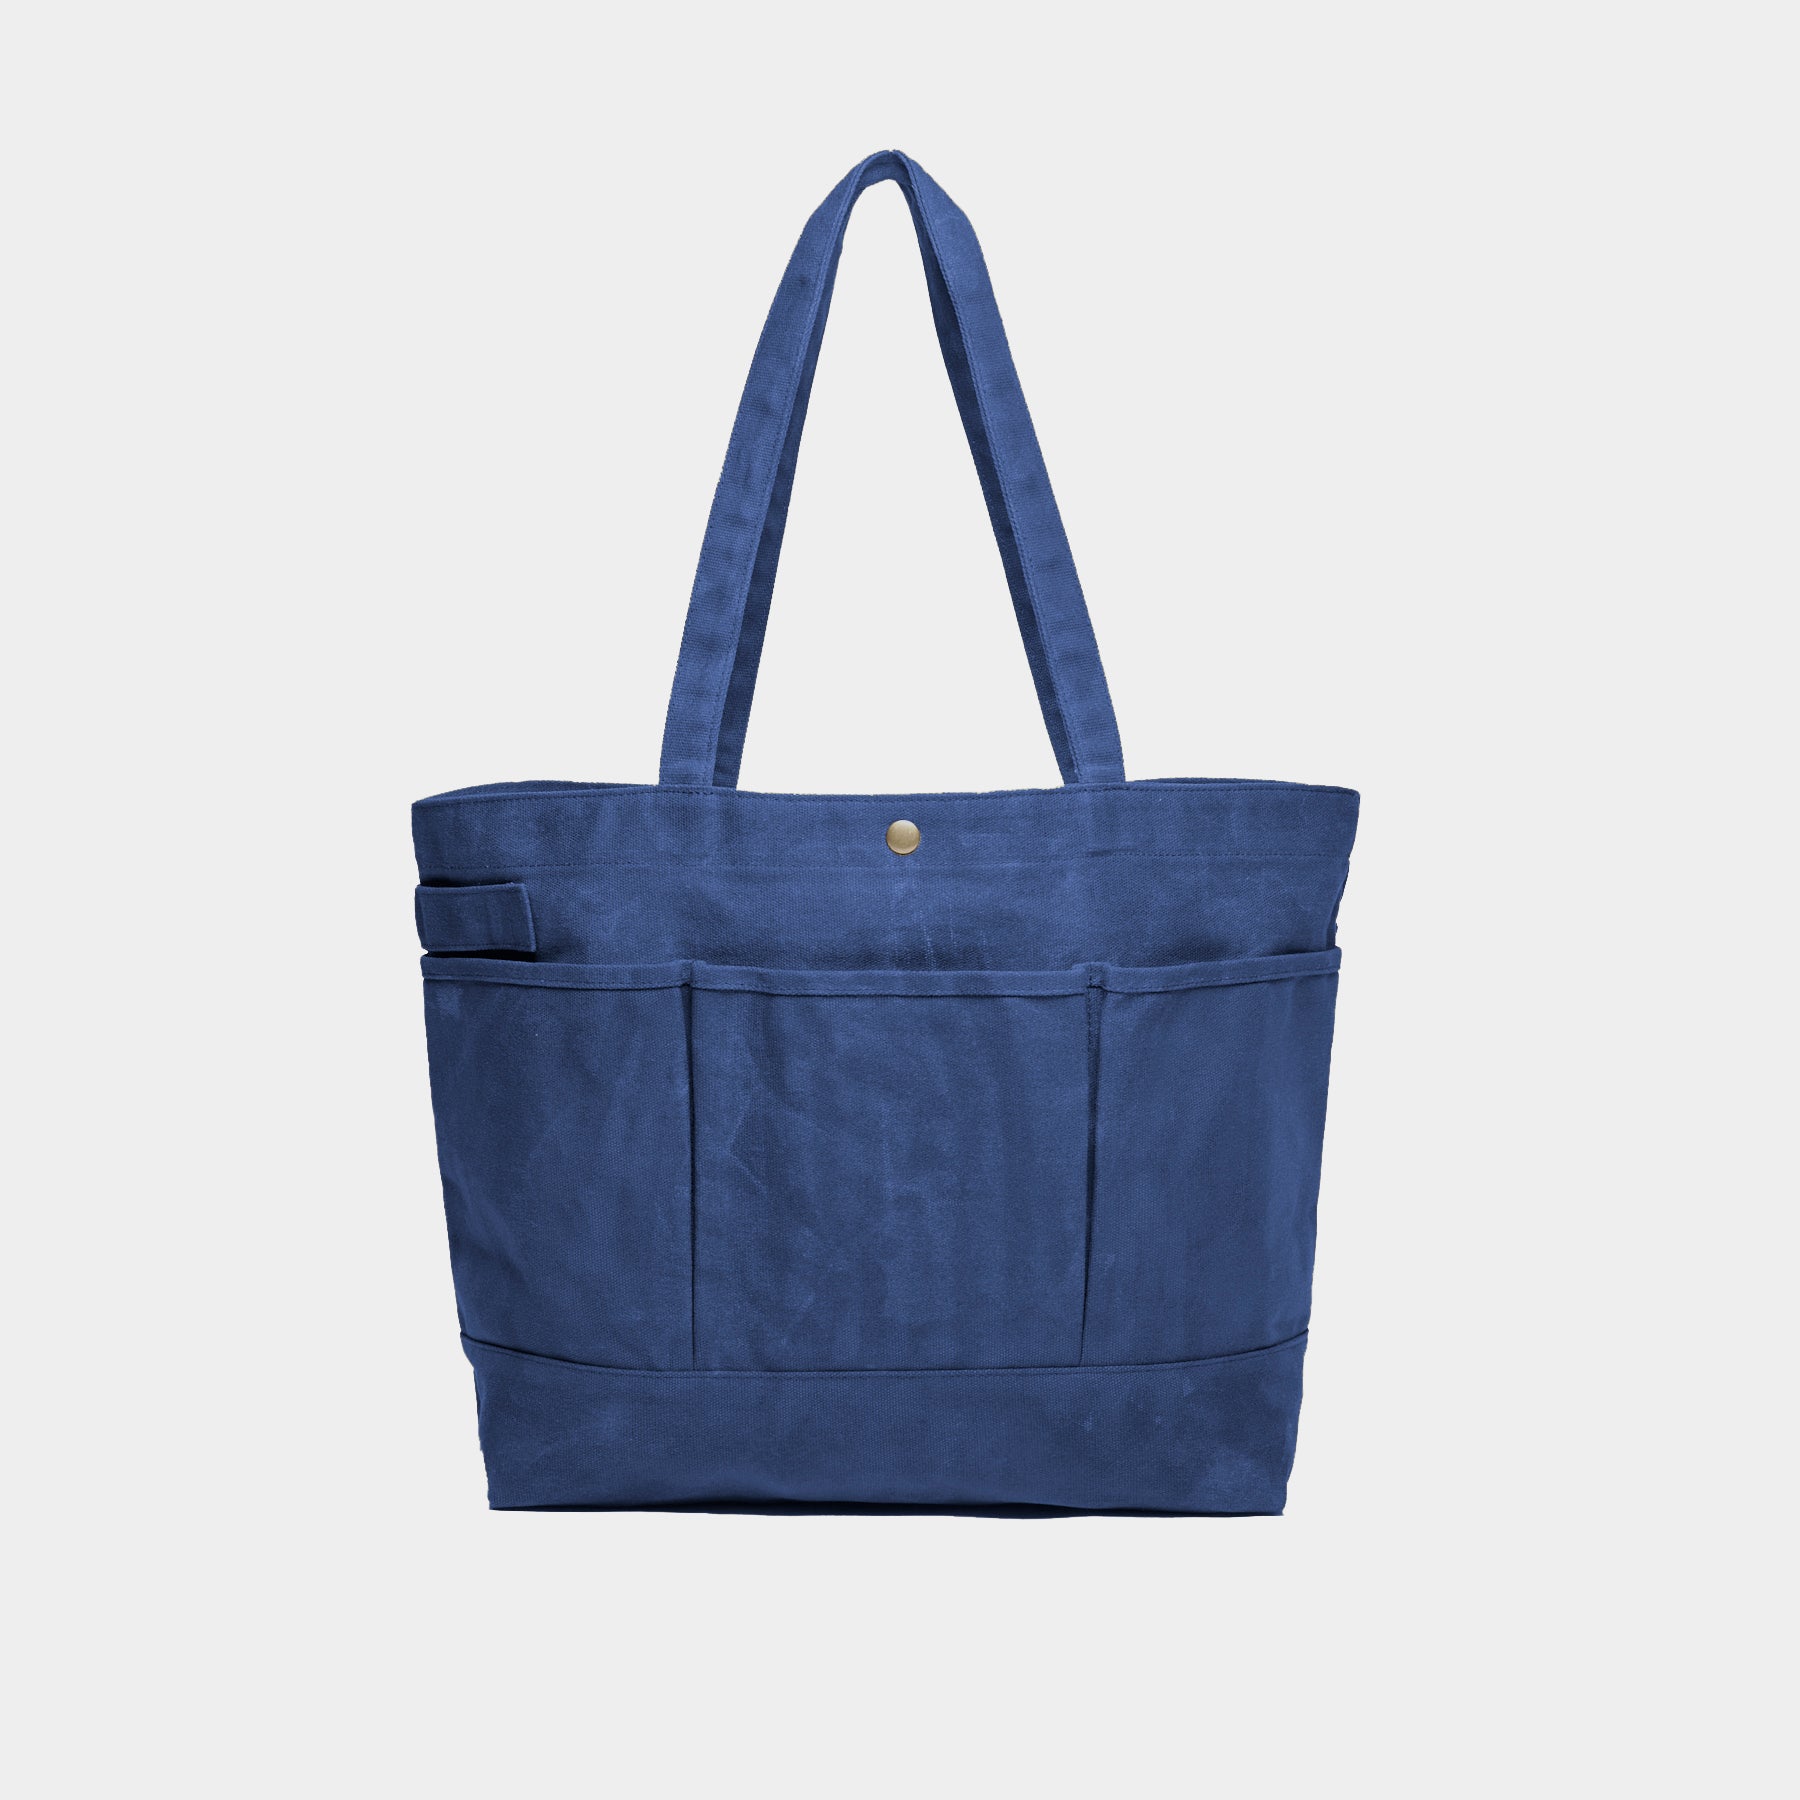 Gardenheir Waxed Cotton Tote Bag in French Blue